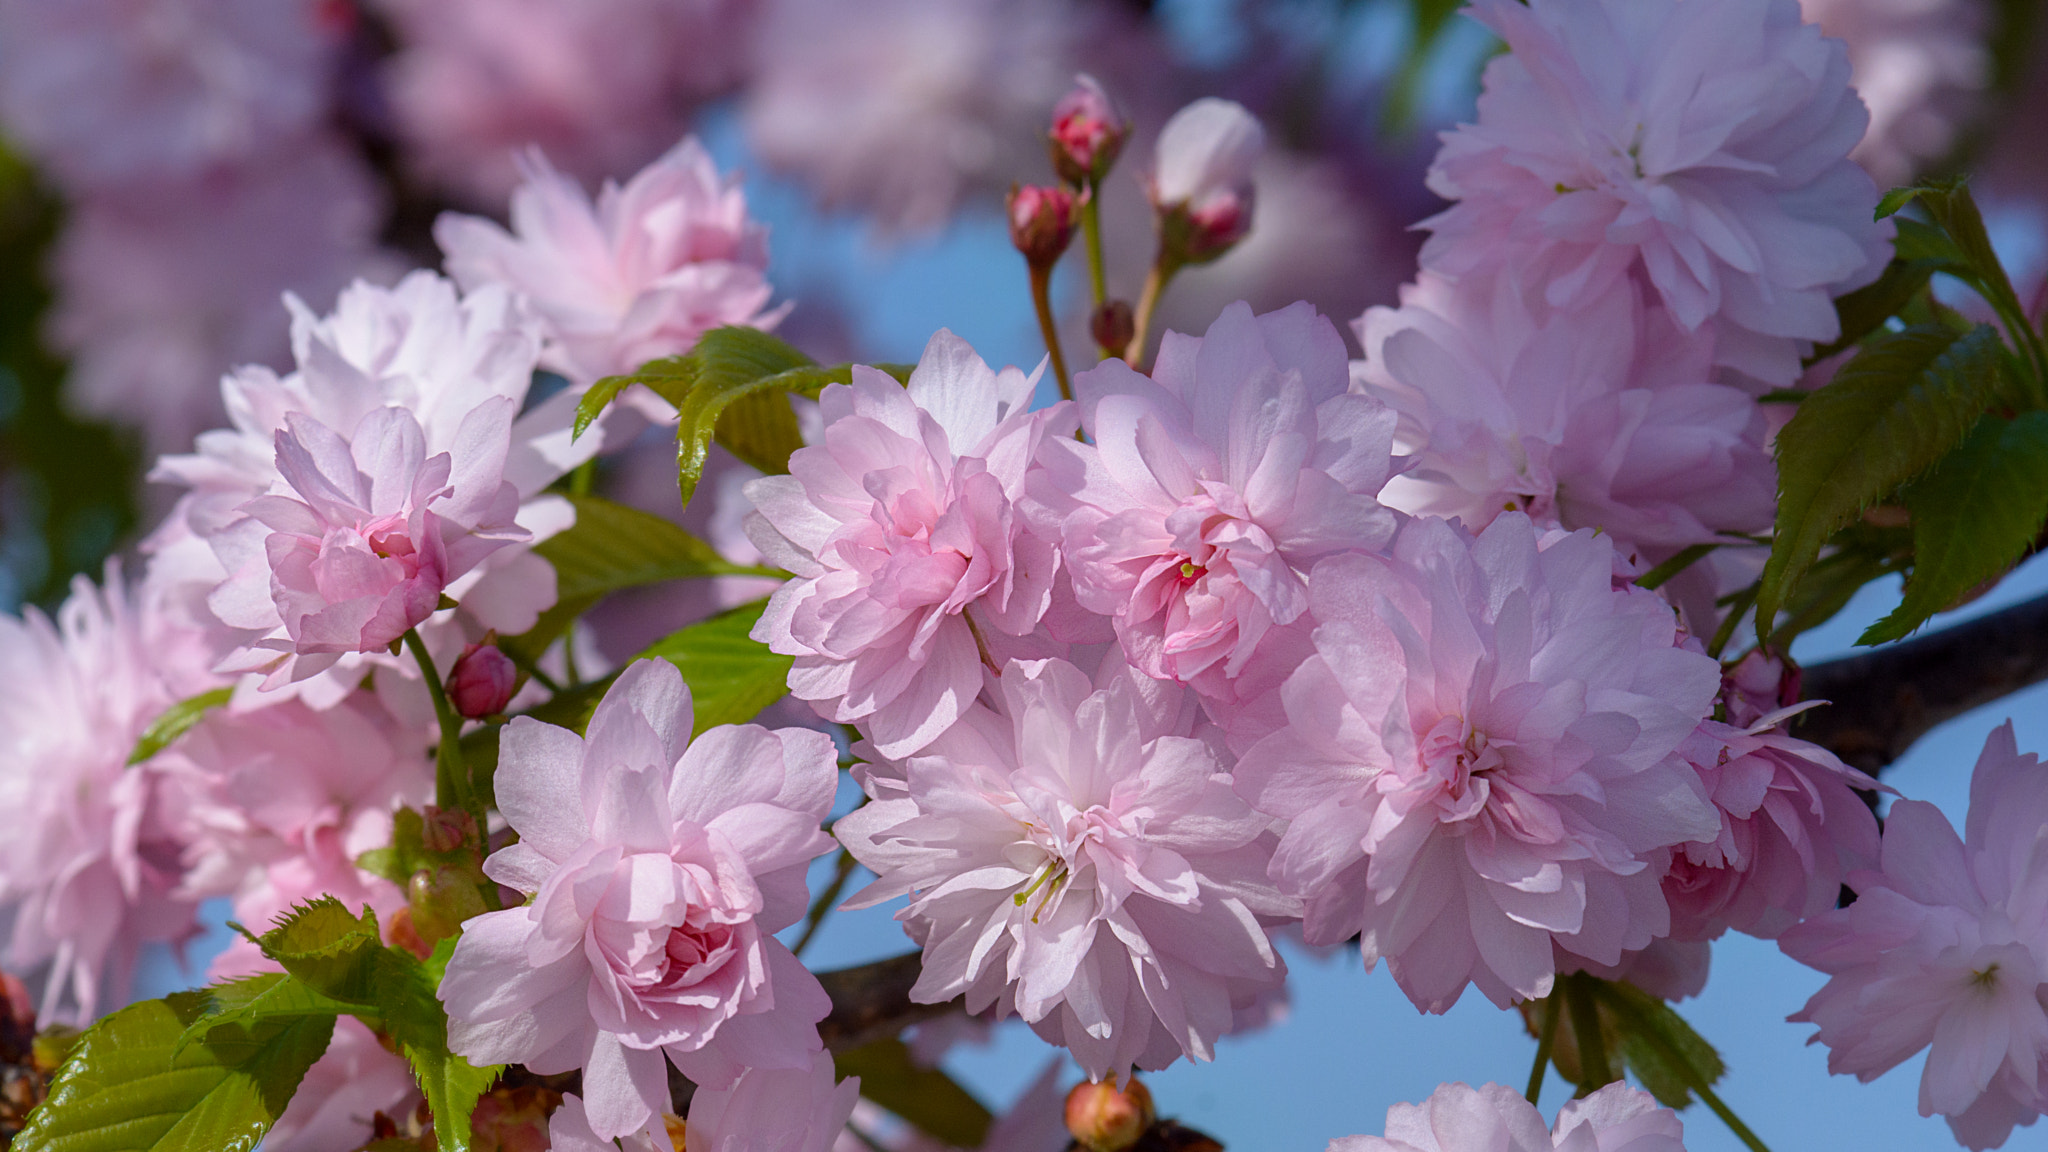 Wallpapers spring flowering branch Cherry Blossoms on the desktop